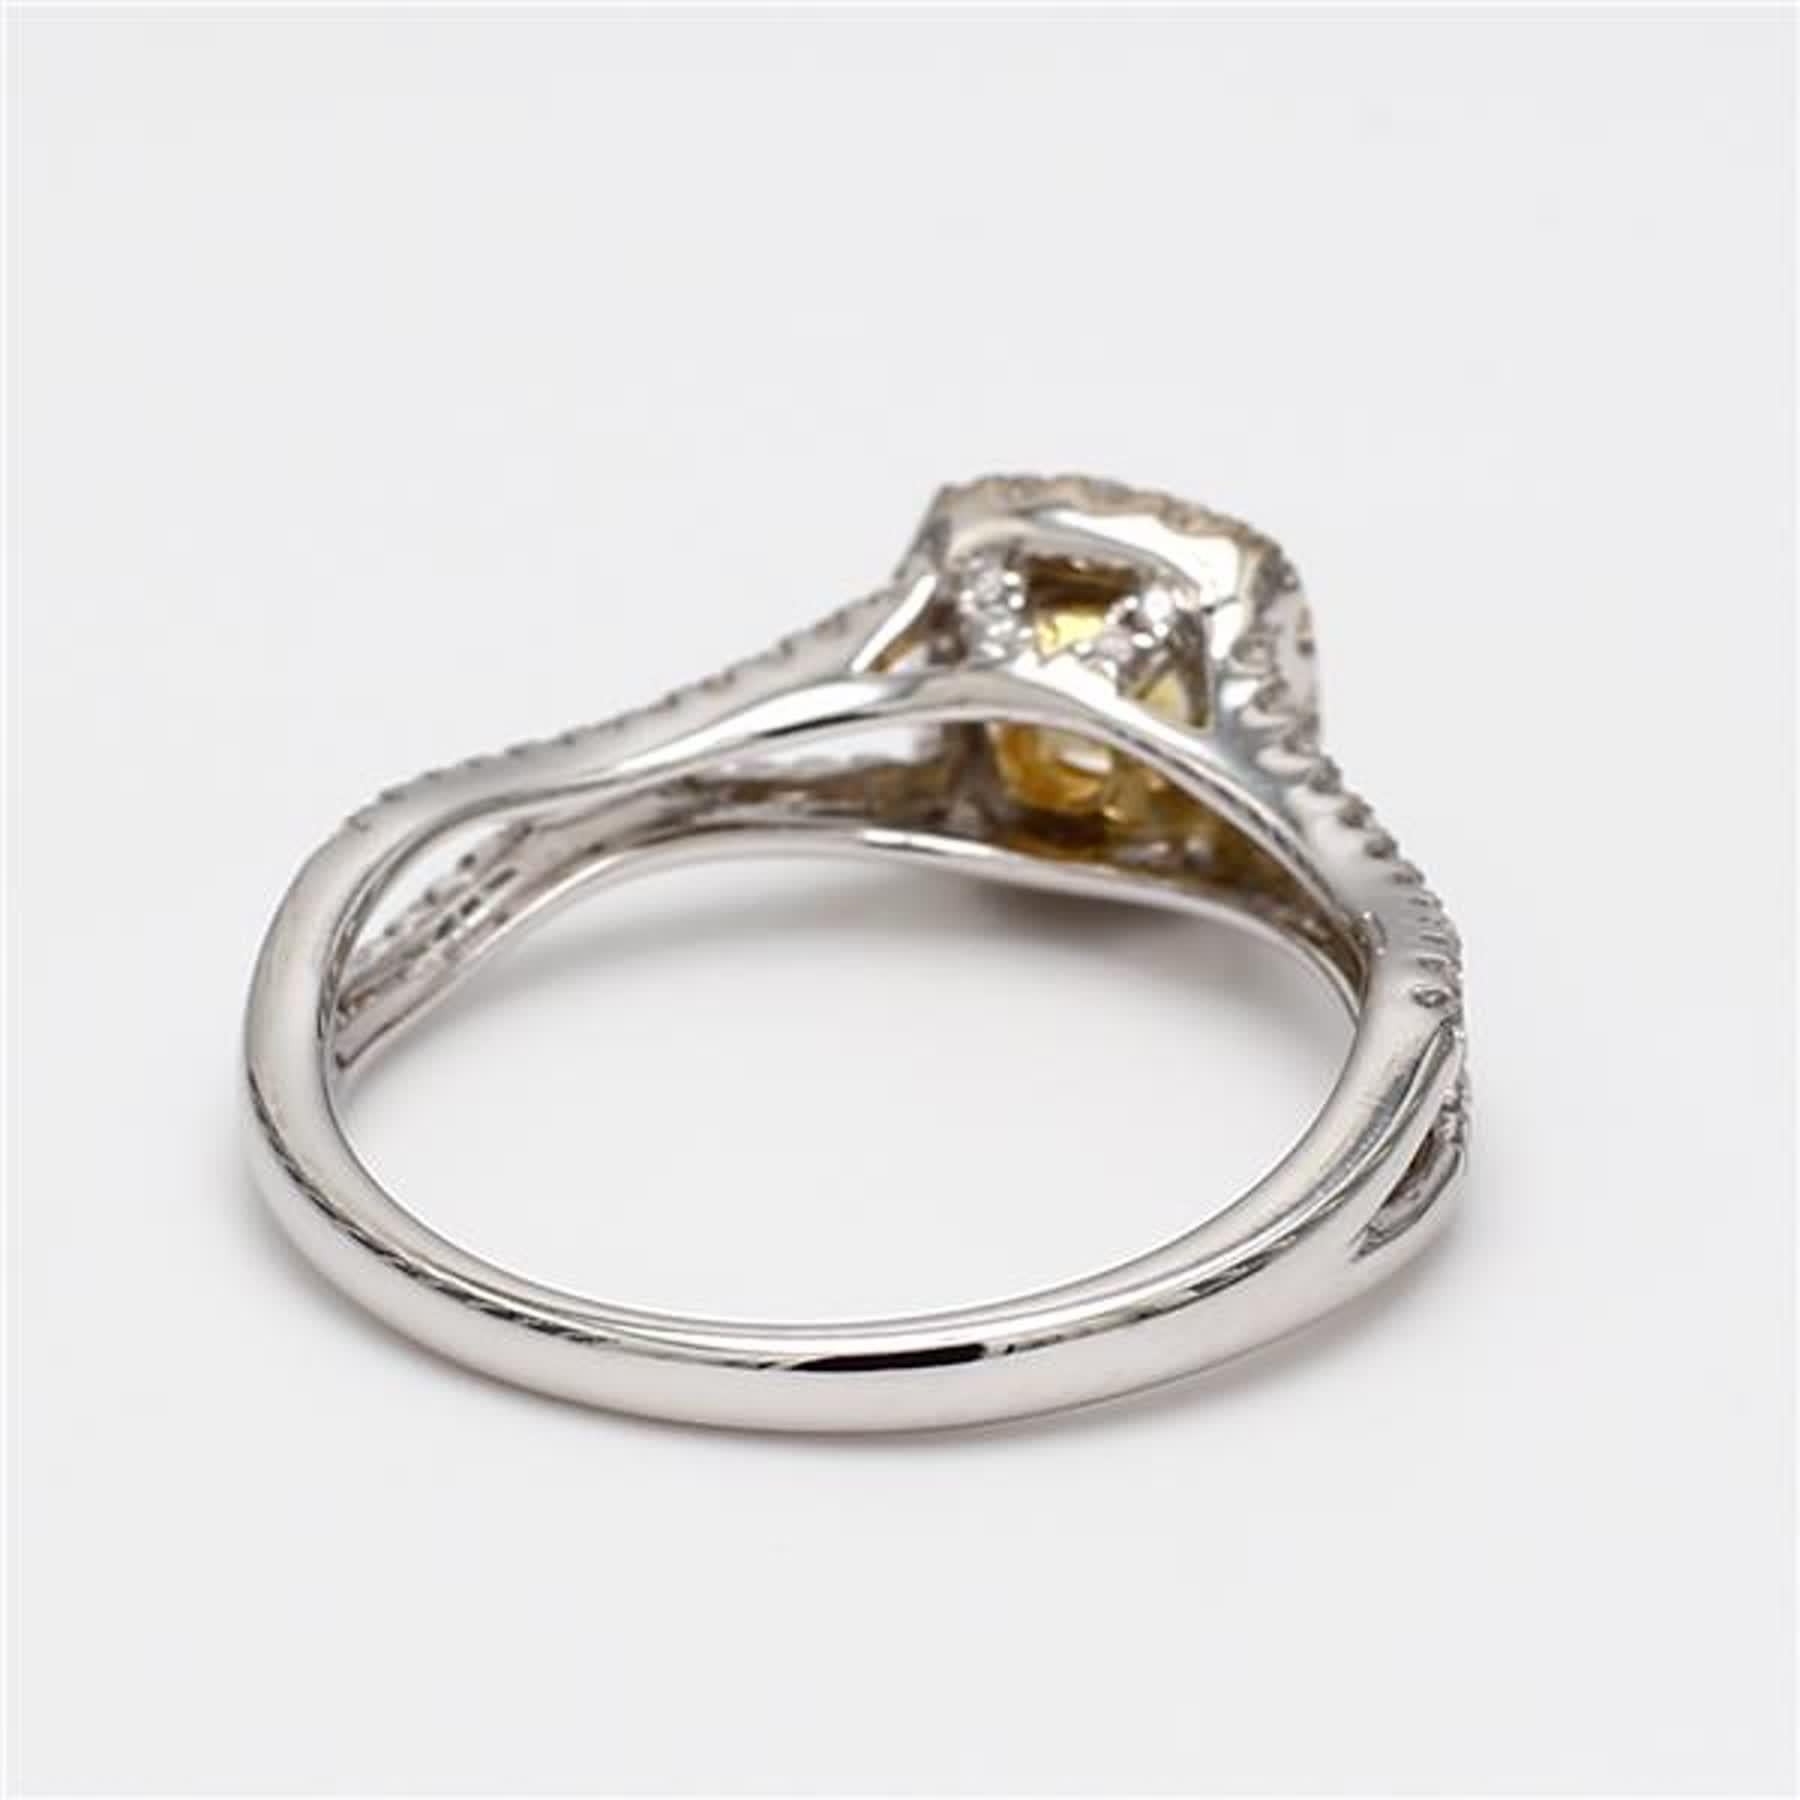 Cushion Cut GIA Certified Natural Yellow Cushion and White Diamond .65 Carat TW Gold Ring